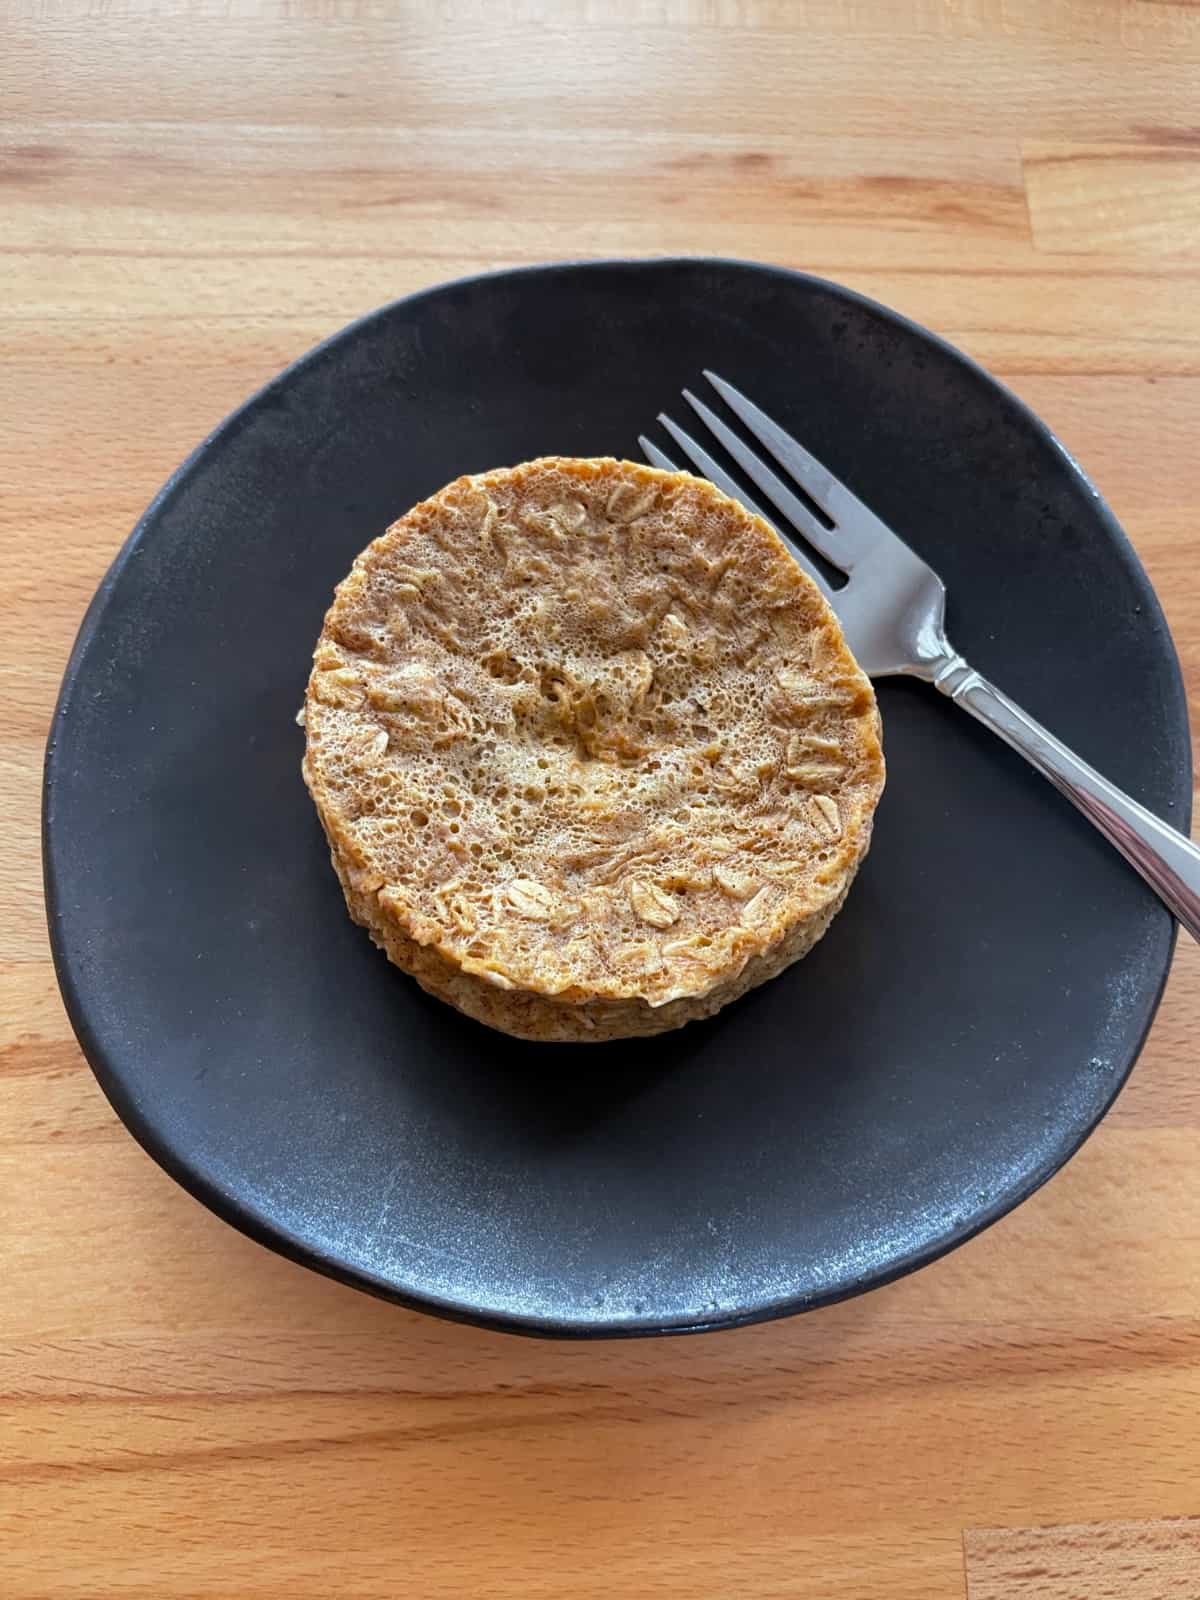 Oatmeal raisin microwave muffin on brown ceramic plate with fork.